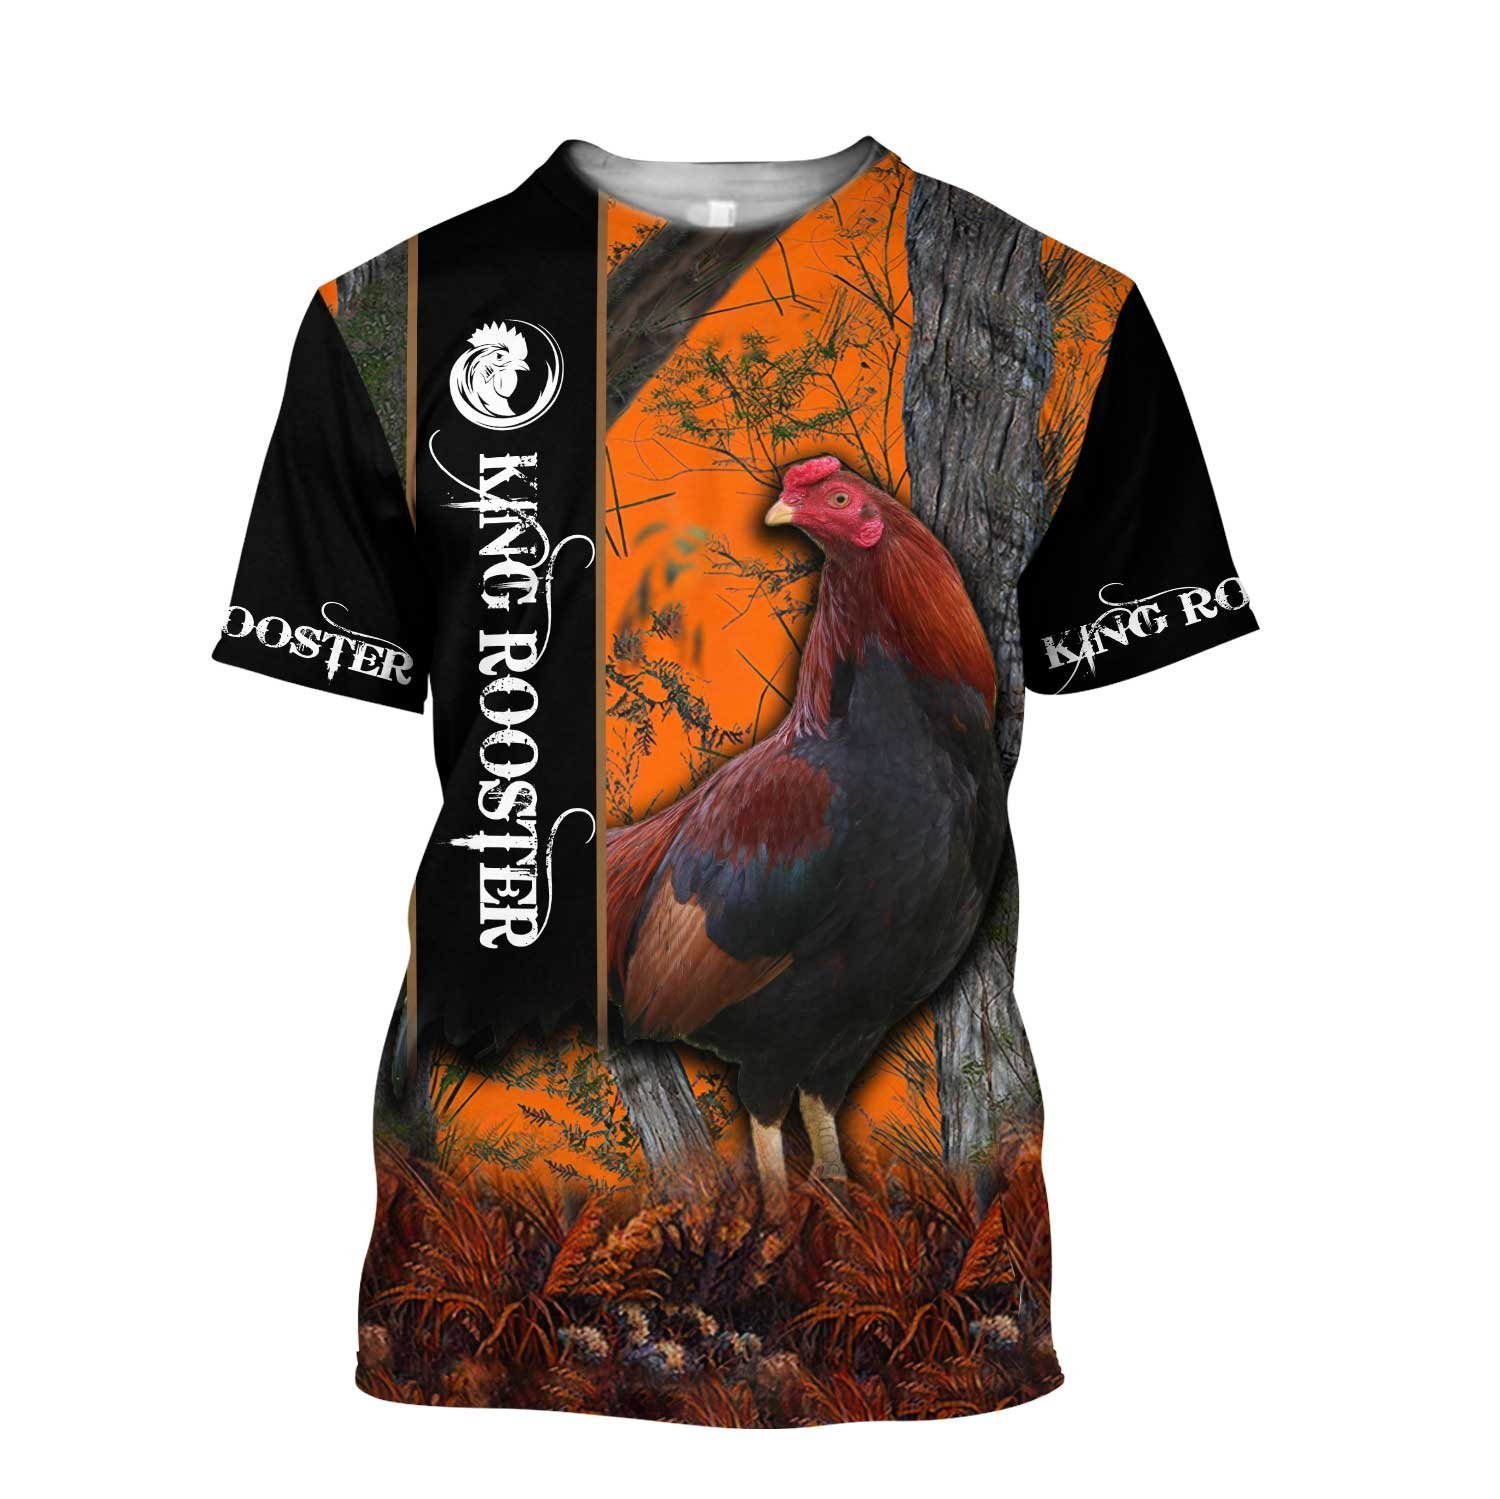 Premium White Rooster Hunting Camo 3D All Over Printed Men t shirt Summer style Casual Tee shirts Unisex street Tshirt TX-102